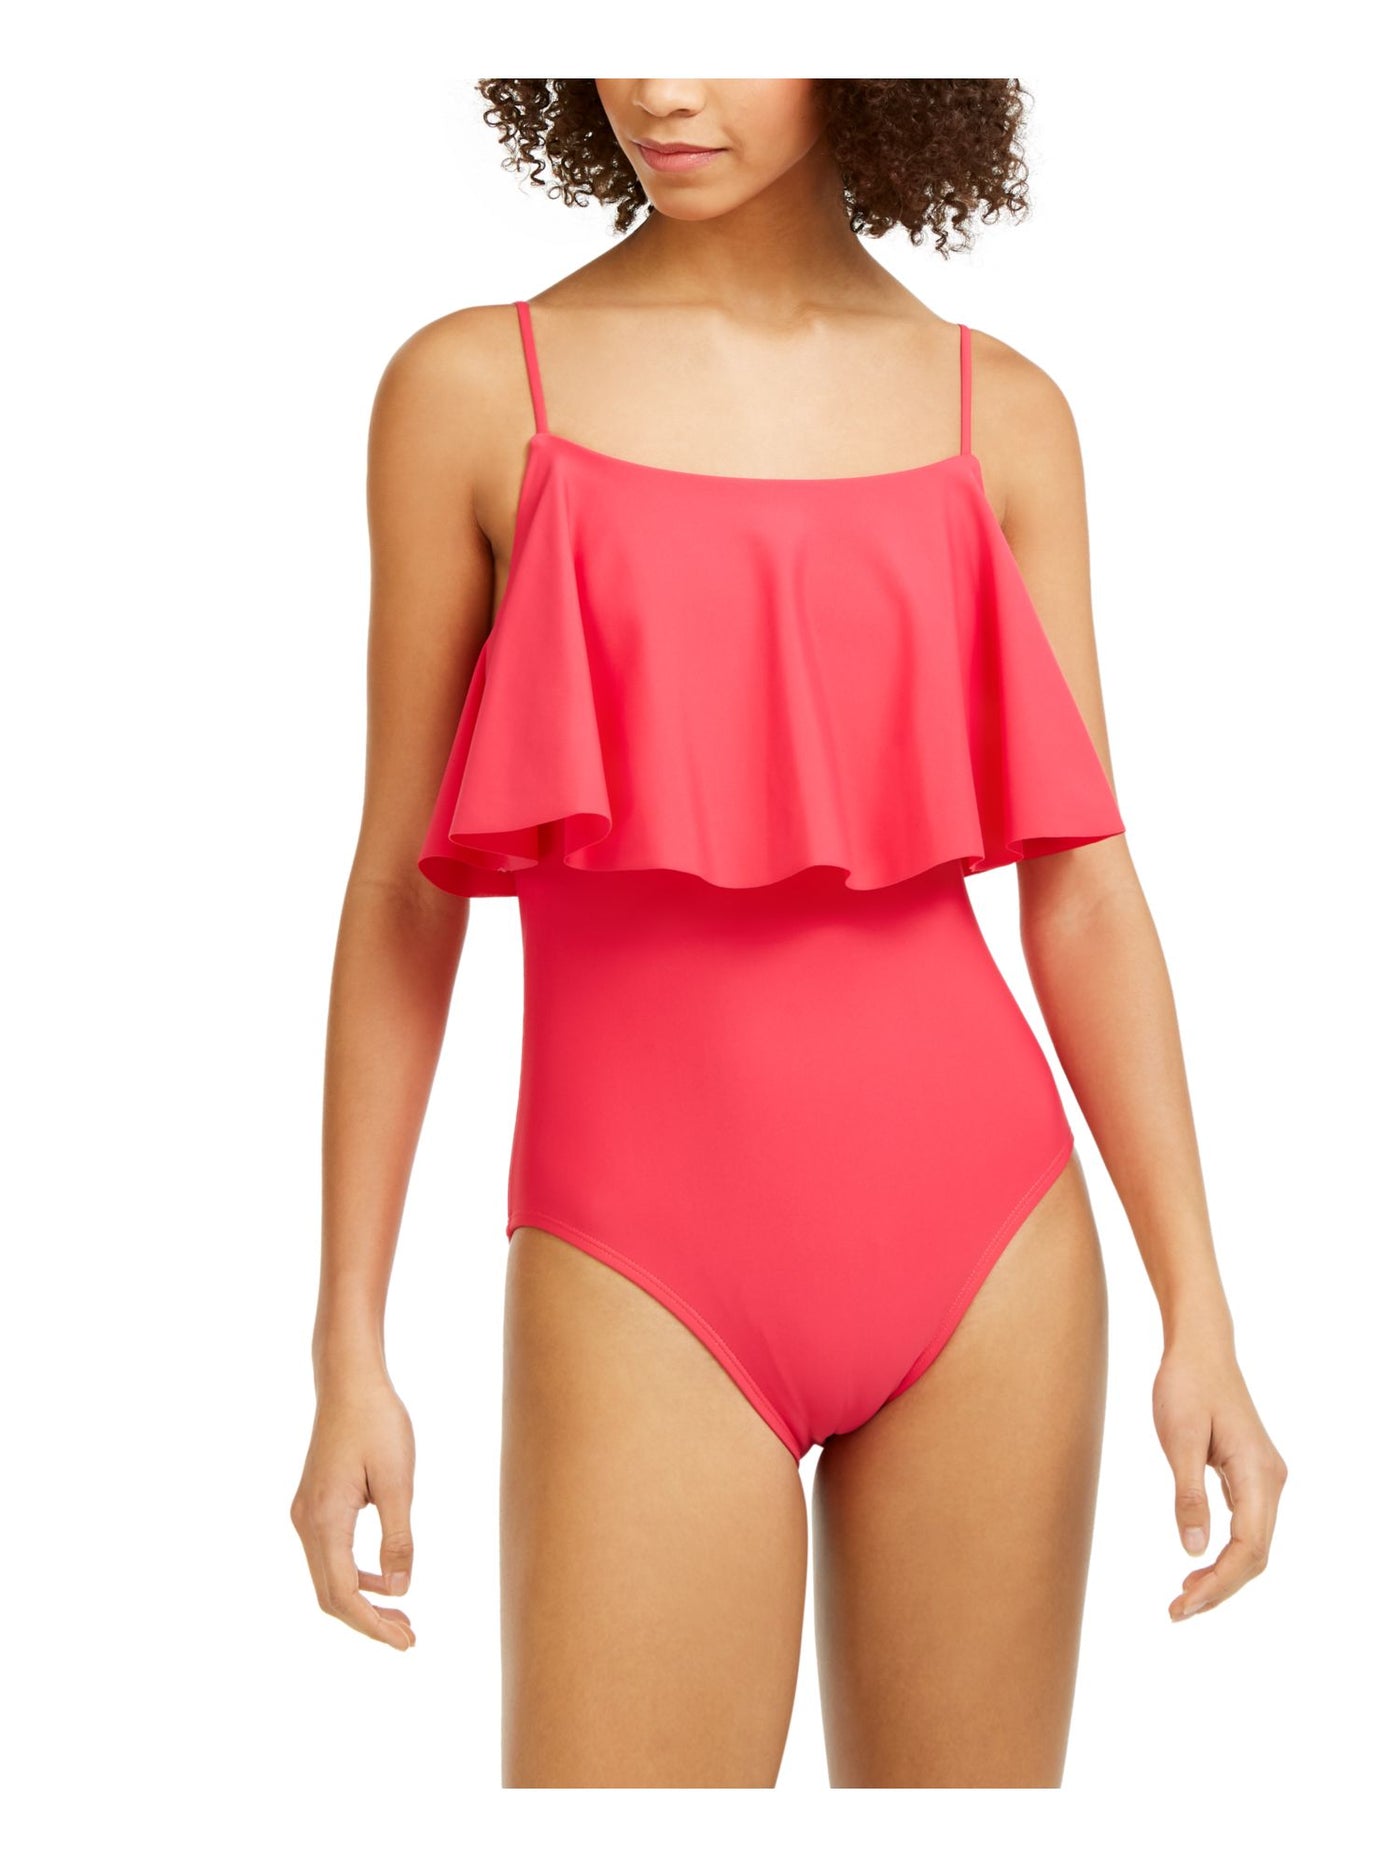 TOMMY HILFIGER Women's Pink Stretch Flutter Removable Cups Moderate Coverage Adjustable One Piece Swimsuit 12